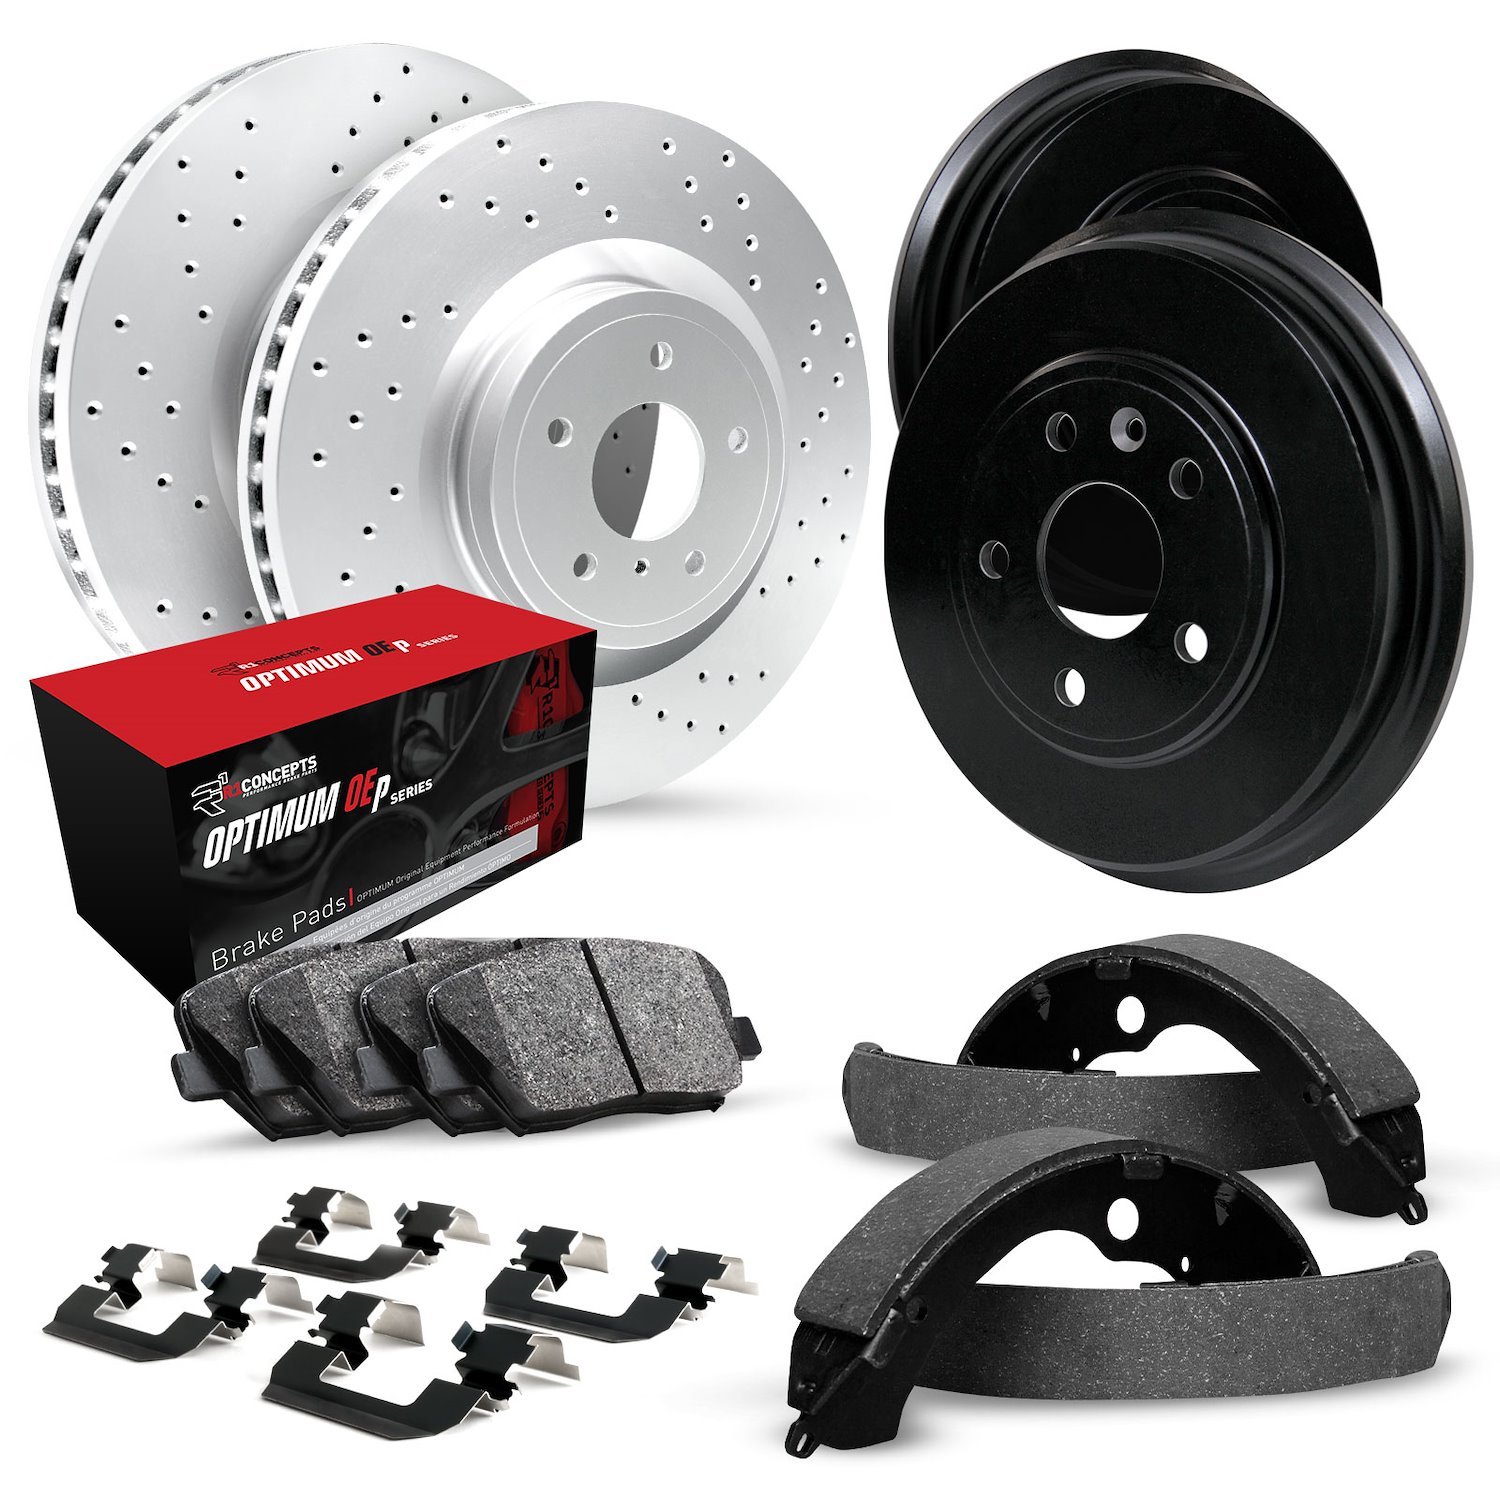 GEO-Carbon Drilled Brake Rotor & Drum Set w/Optimum OE Pads, Shoes, & Hardware, 1975-1975 GM, Position: Front & Rear